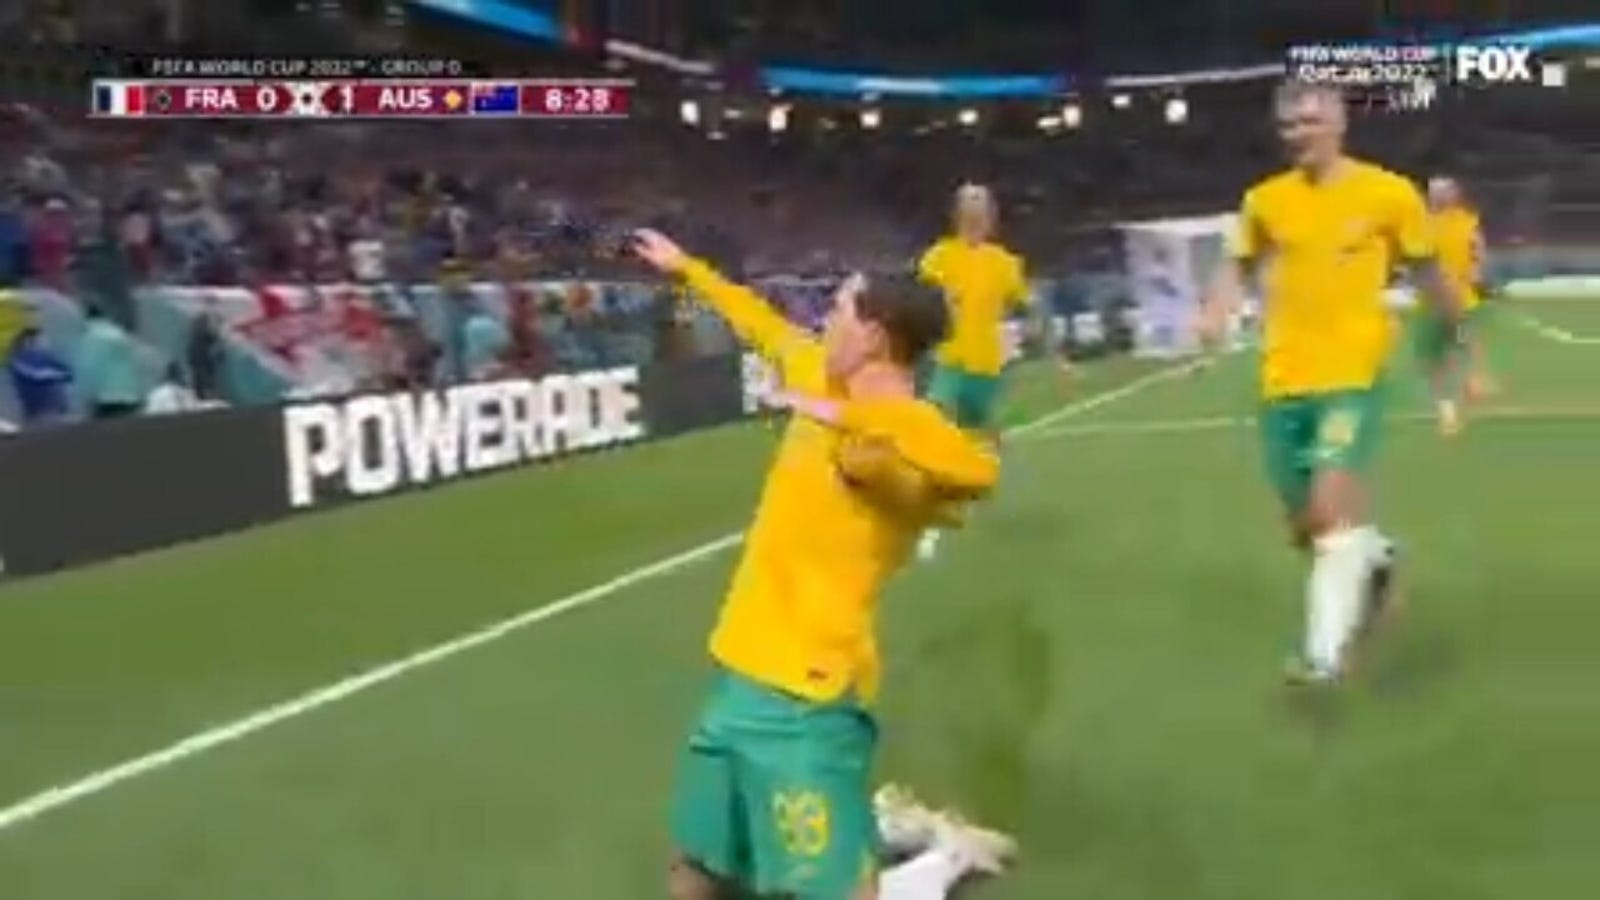 Craig Goodwin strikes first in the 9th minute to give Australia a 1-0 lead over France 